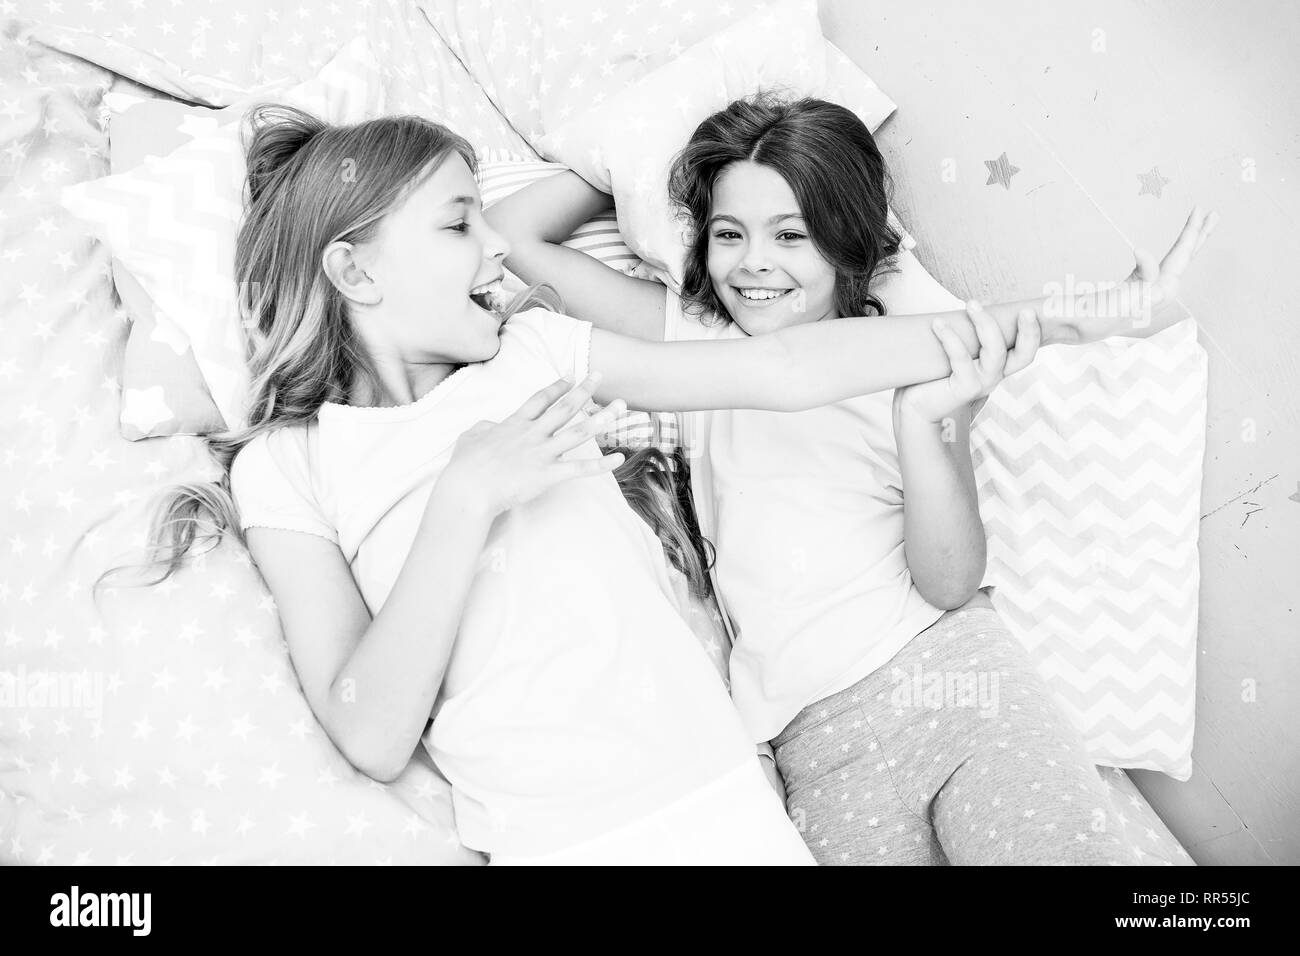 Slumber party concept. Girls just want to have fun. Invite friend for sleepover. Best friends forever. Consider theme slumber party. Slumber party timeless childhood tradition. Girls relaxing on bed. Stock Photo